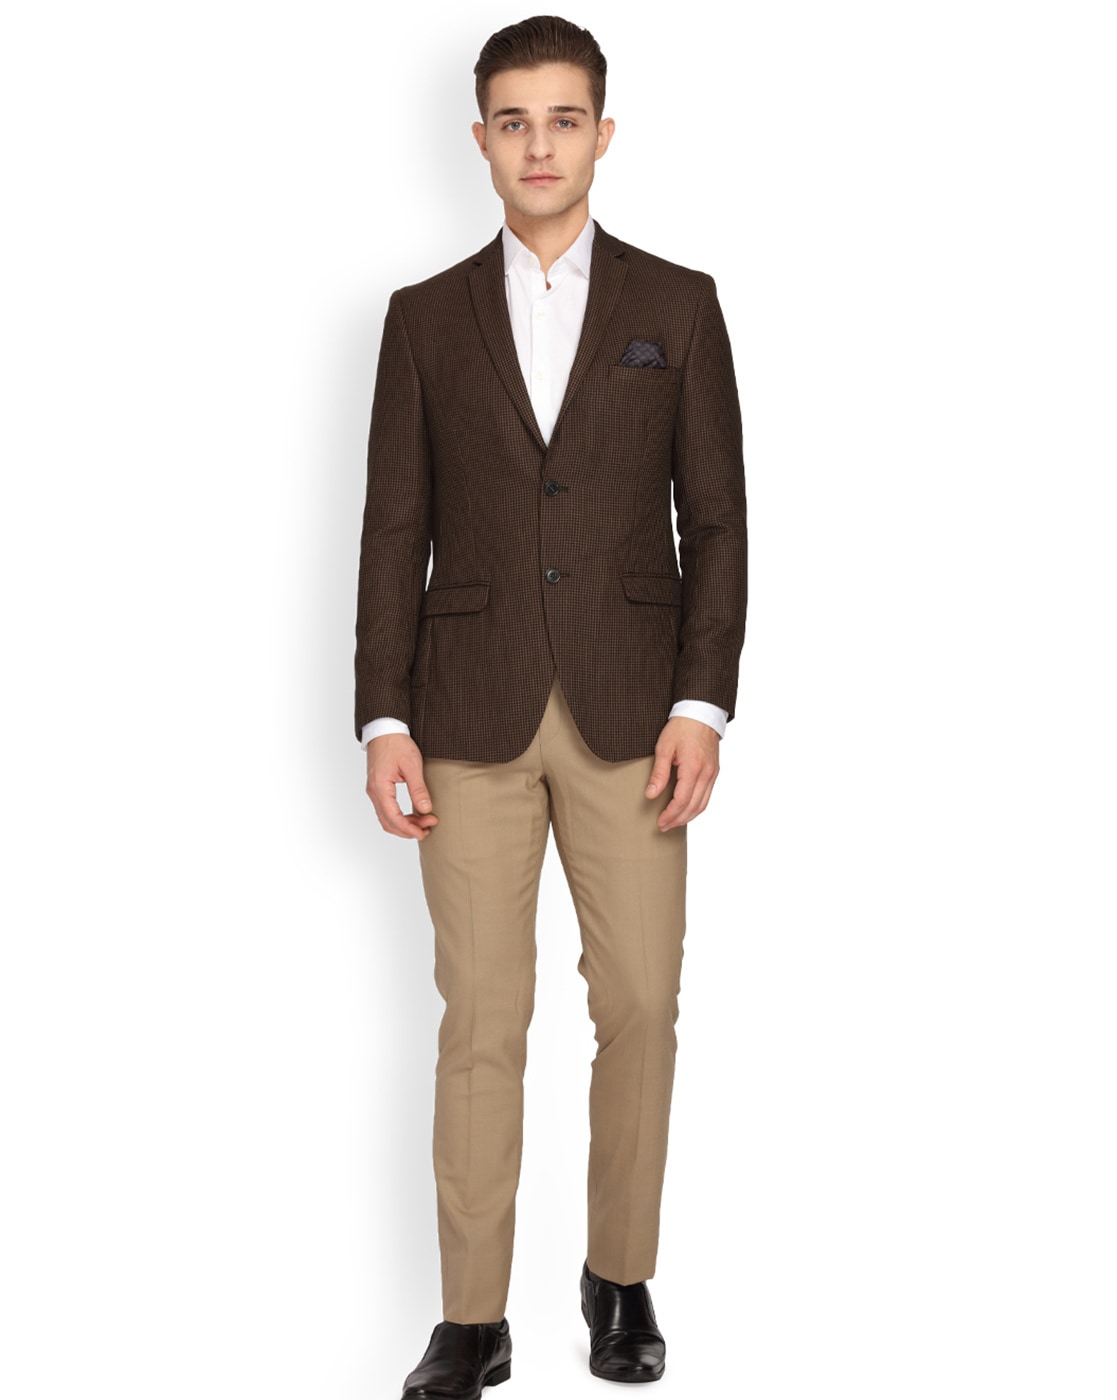 77 Brown Blazer Outfits ideas in 2023  mens outfits brown blazer outfit  stylish men